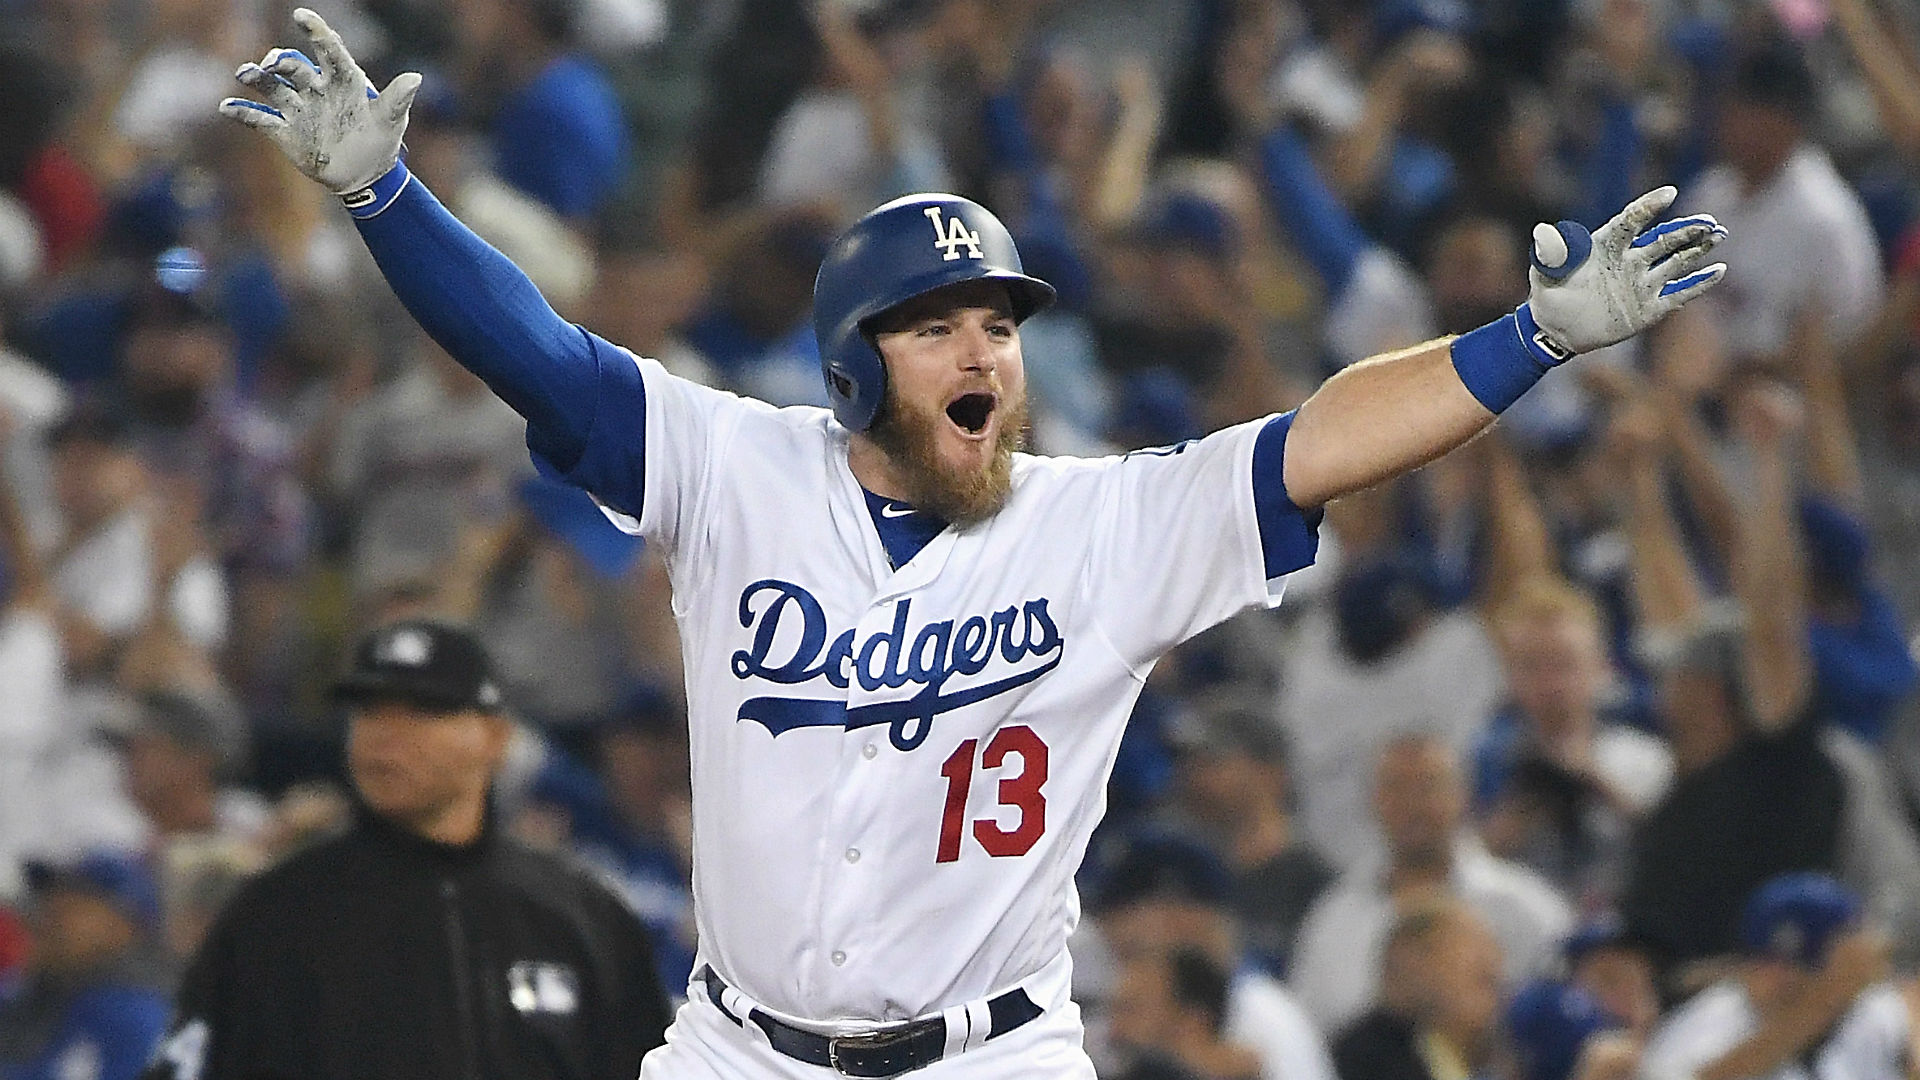 Red Sox vs Dodgers results Dodgers outlast Red Sox Max Muncy